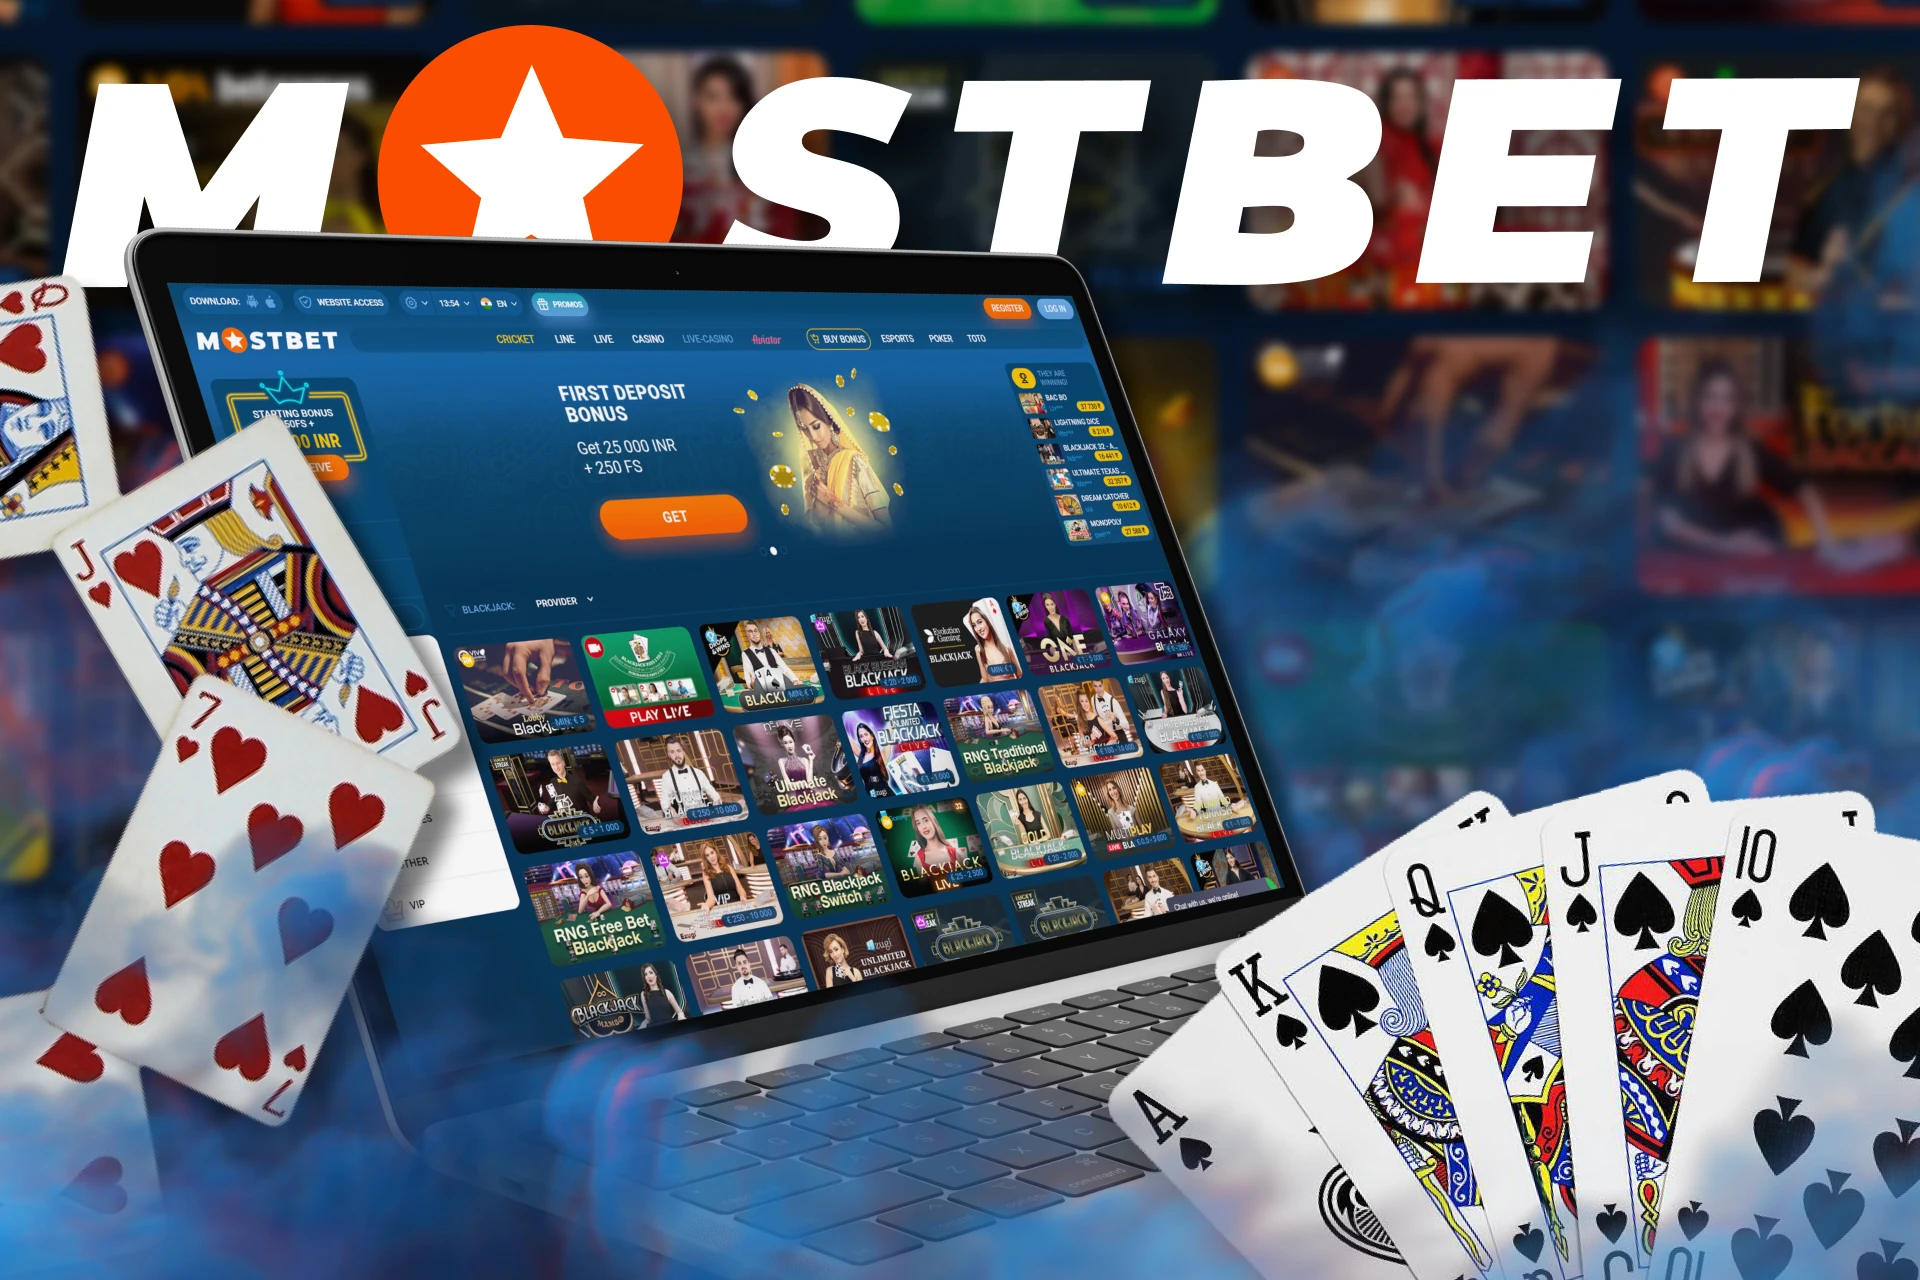 Play the most popular blackjack card game at Mostbet.